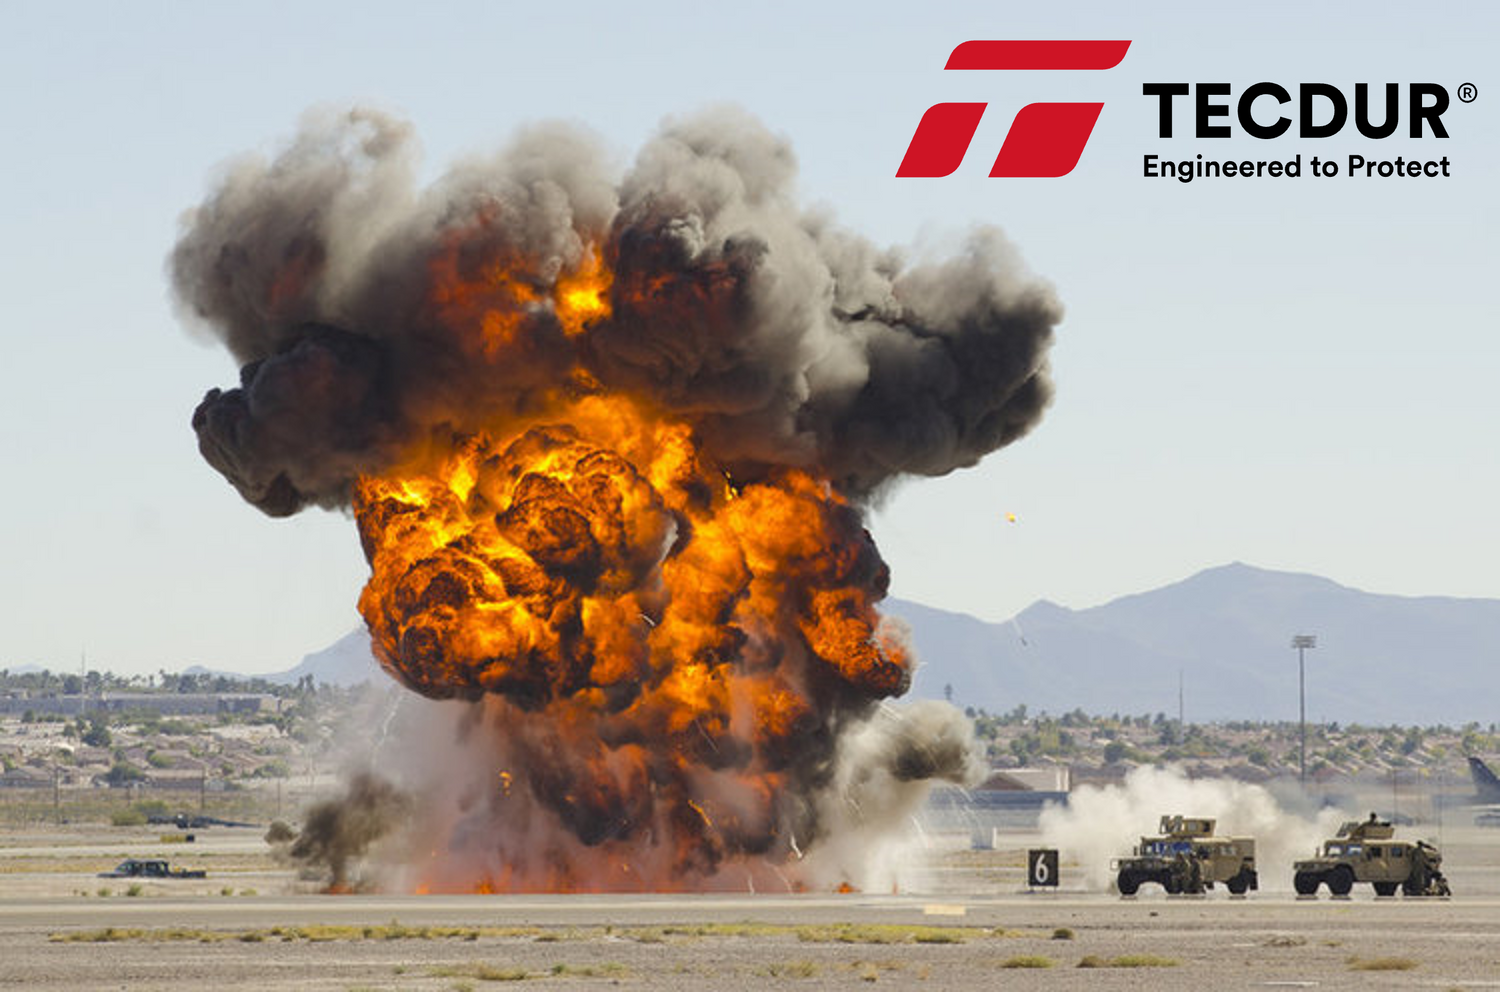 A photo of an explosion in an arid environment besie two armored vehicles. The Tecdur logo is overlayed beside this with the caption "Engineered to protect". Tecdur products are produced by CCP Gransden's sister company Hamilton Erskine